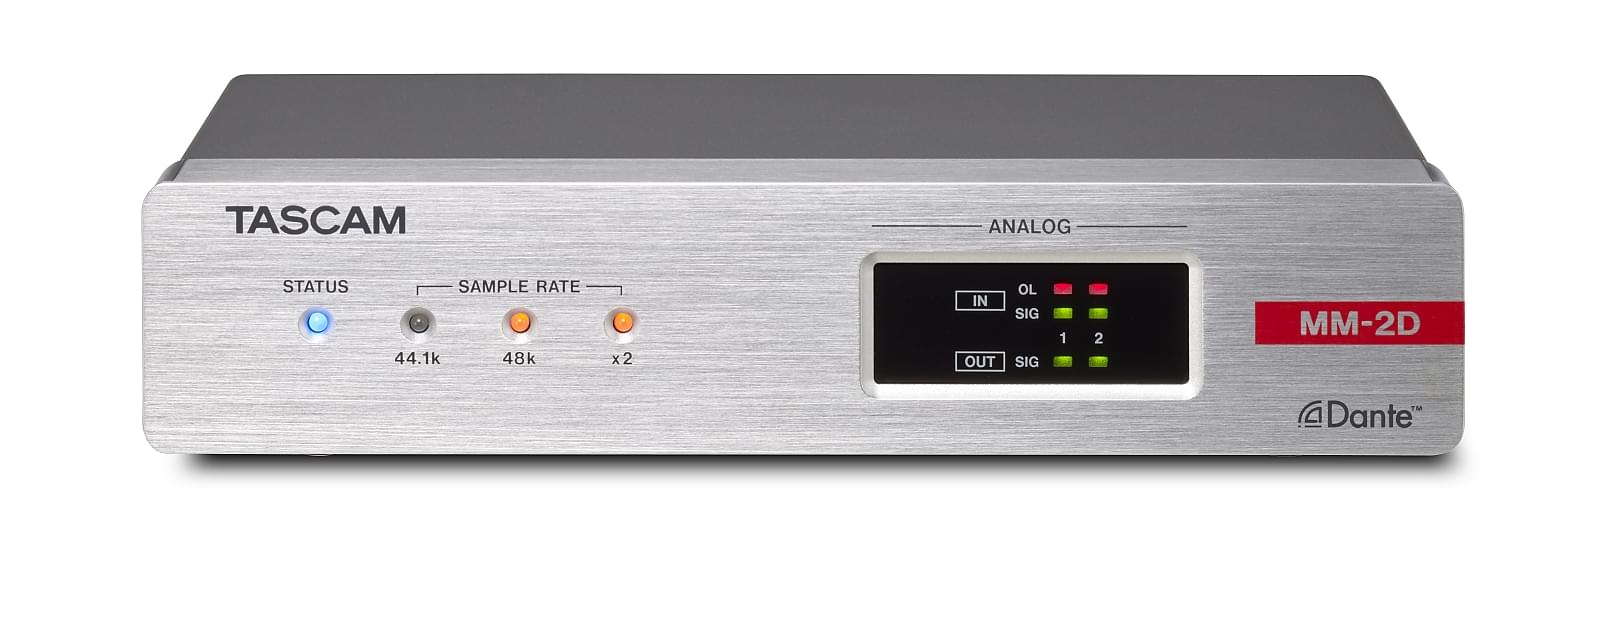 Two-Channel Analogue-Dante-Analogue Converter With DSP Mixer | Tascam MM-2D